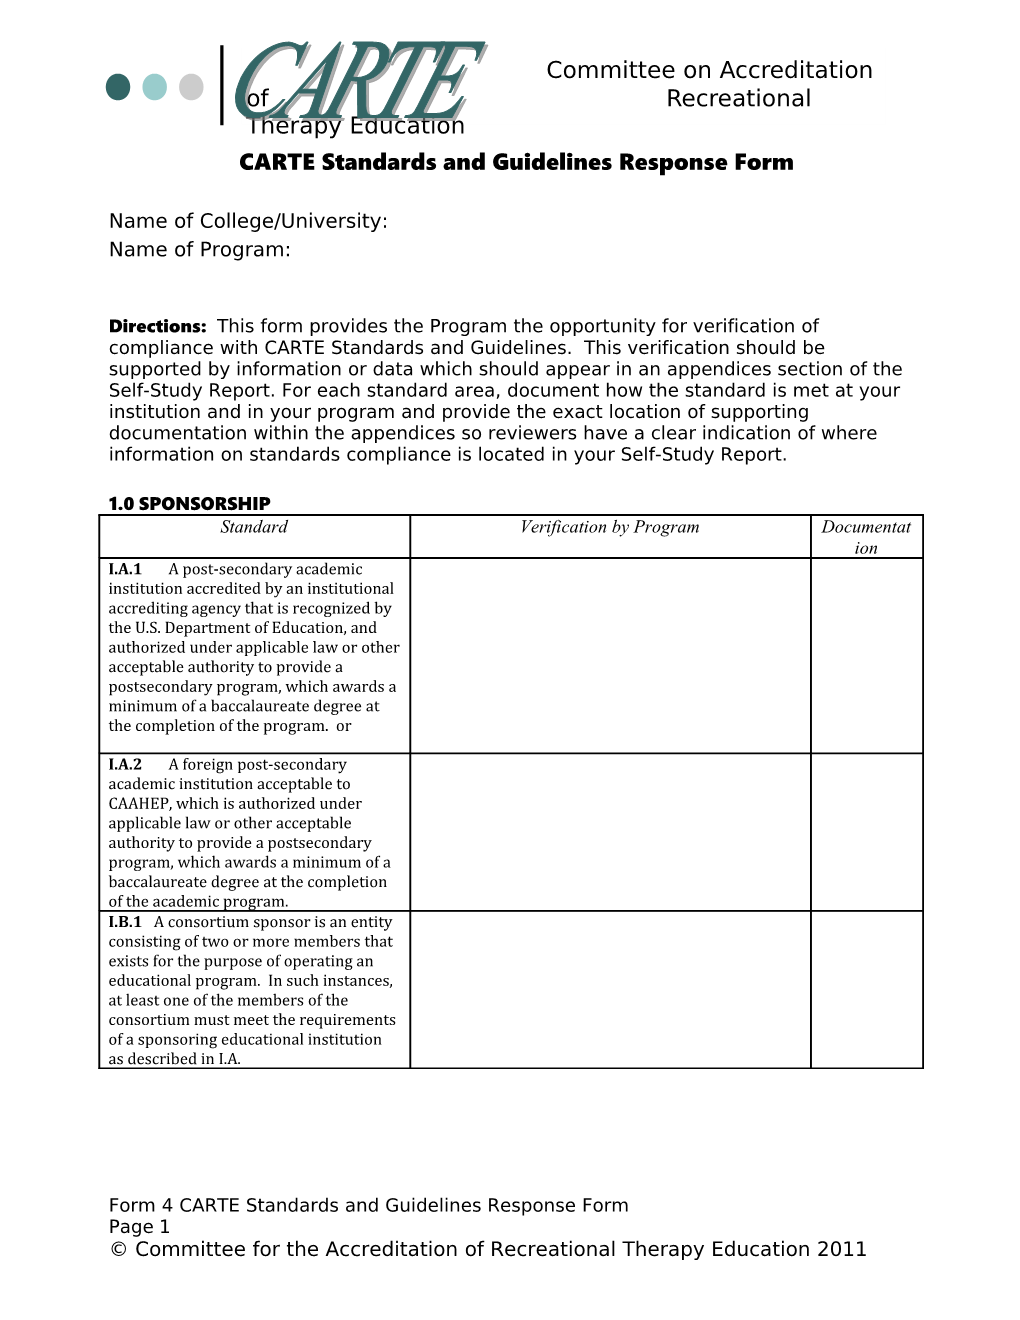 CARTE Standards and Guidelines Response Form